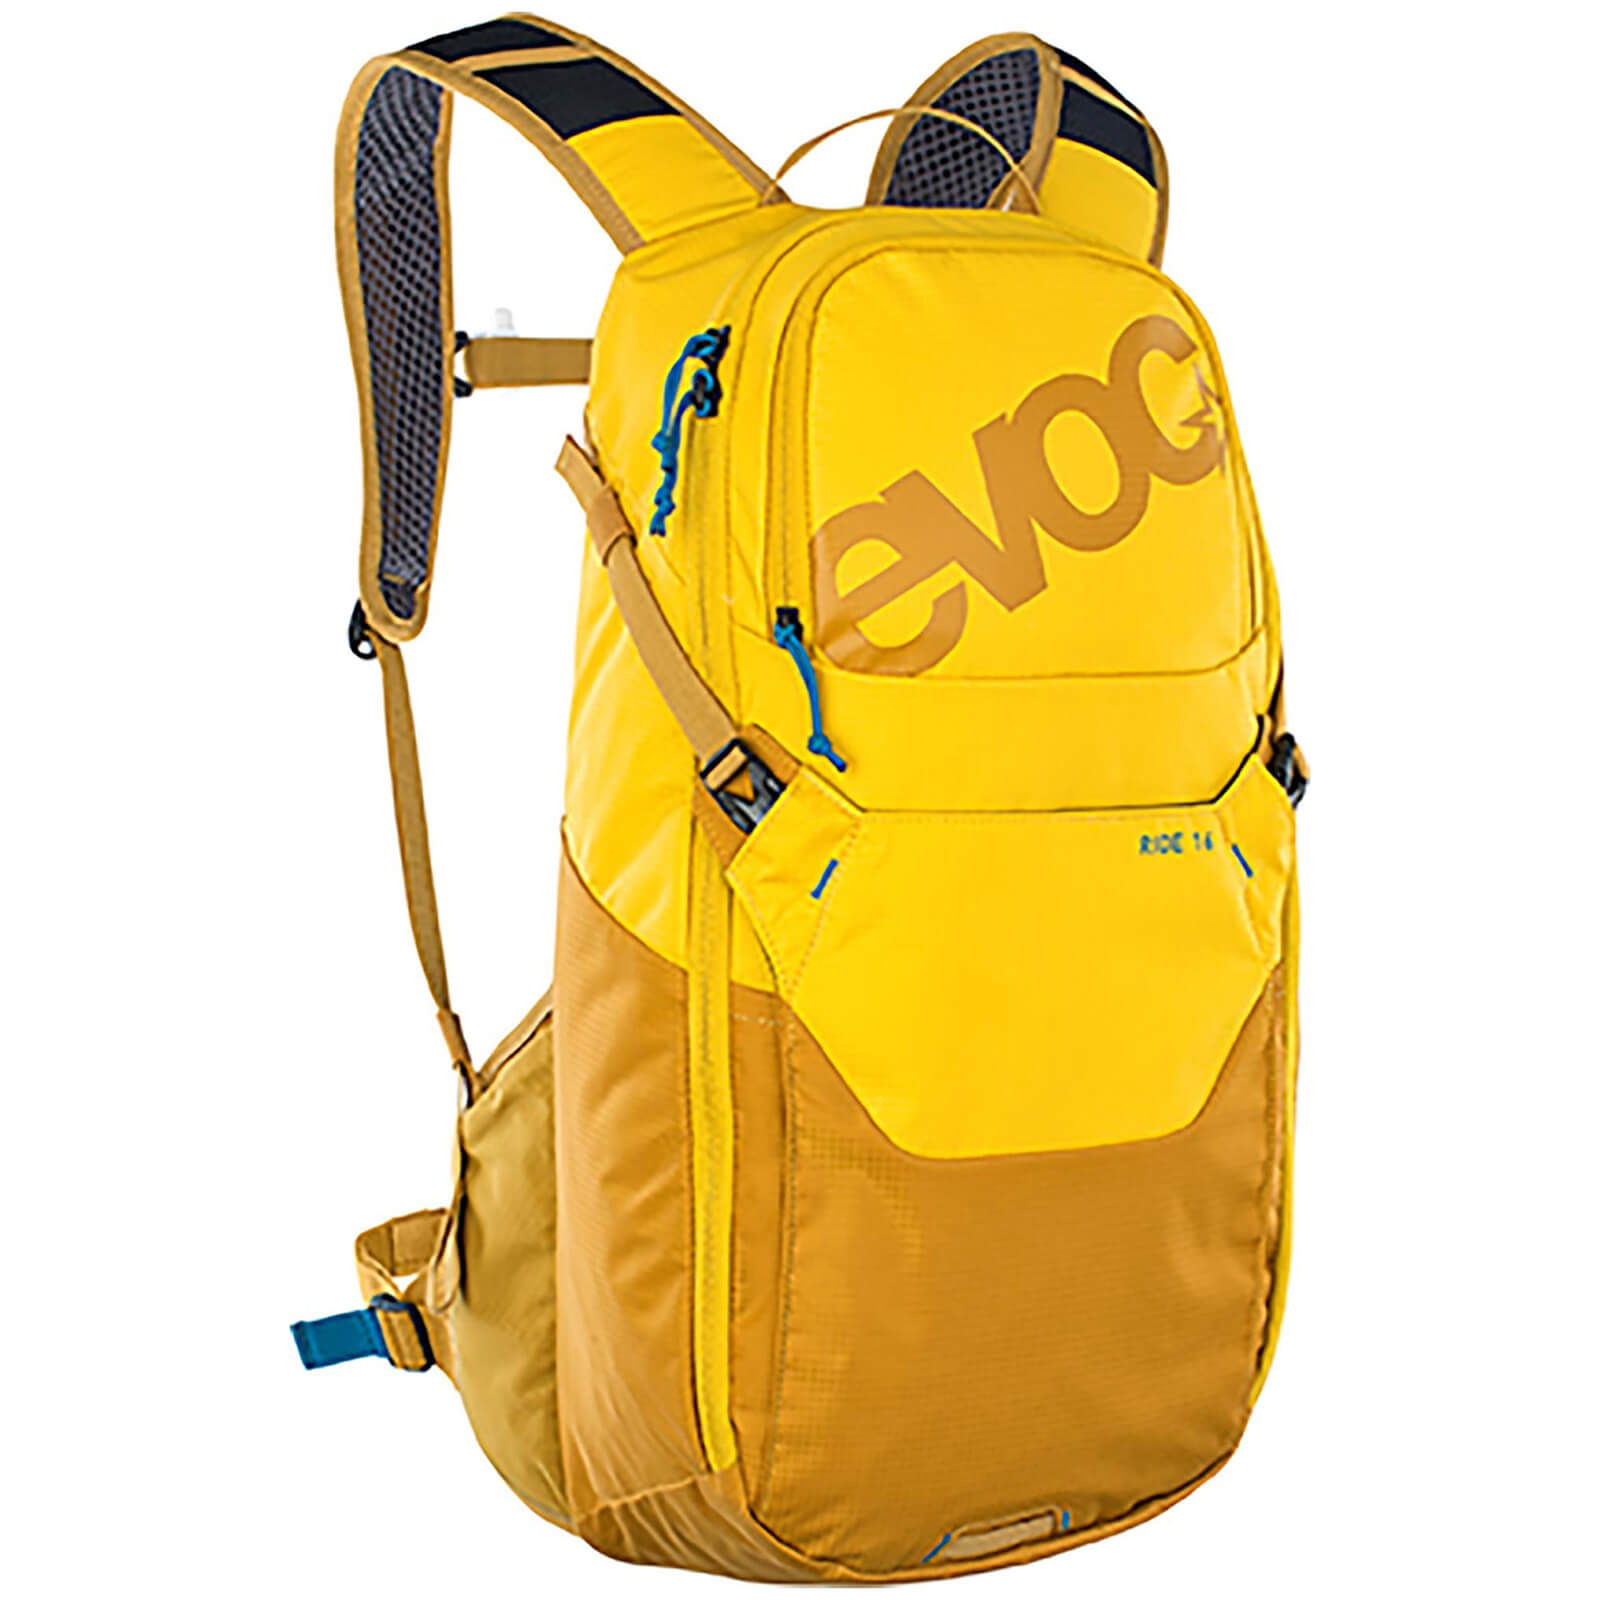 Evoc Ride 16L Performance Backpack - Curry/Loam